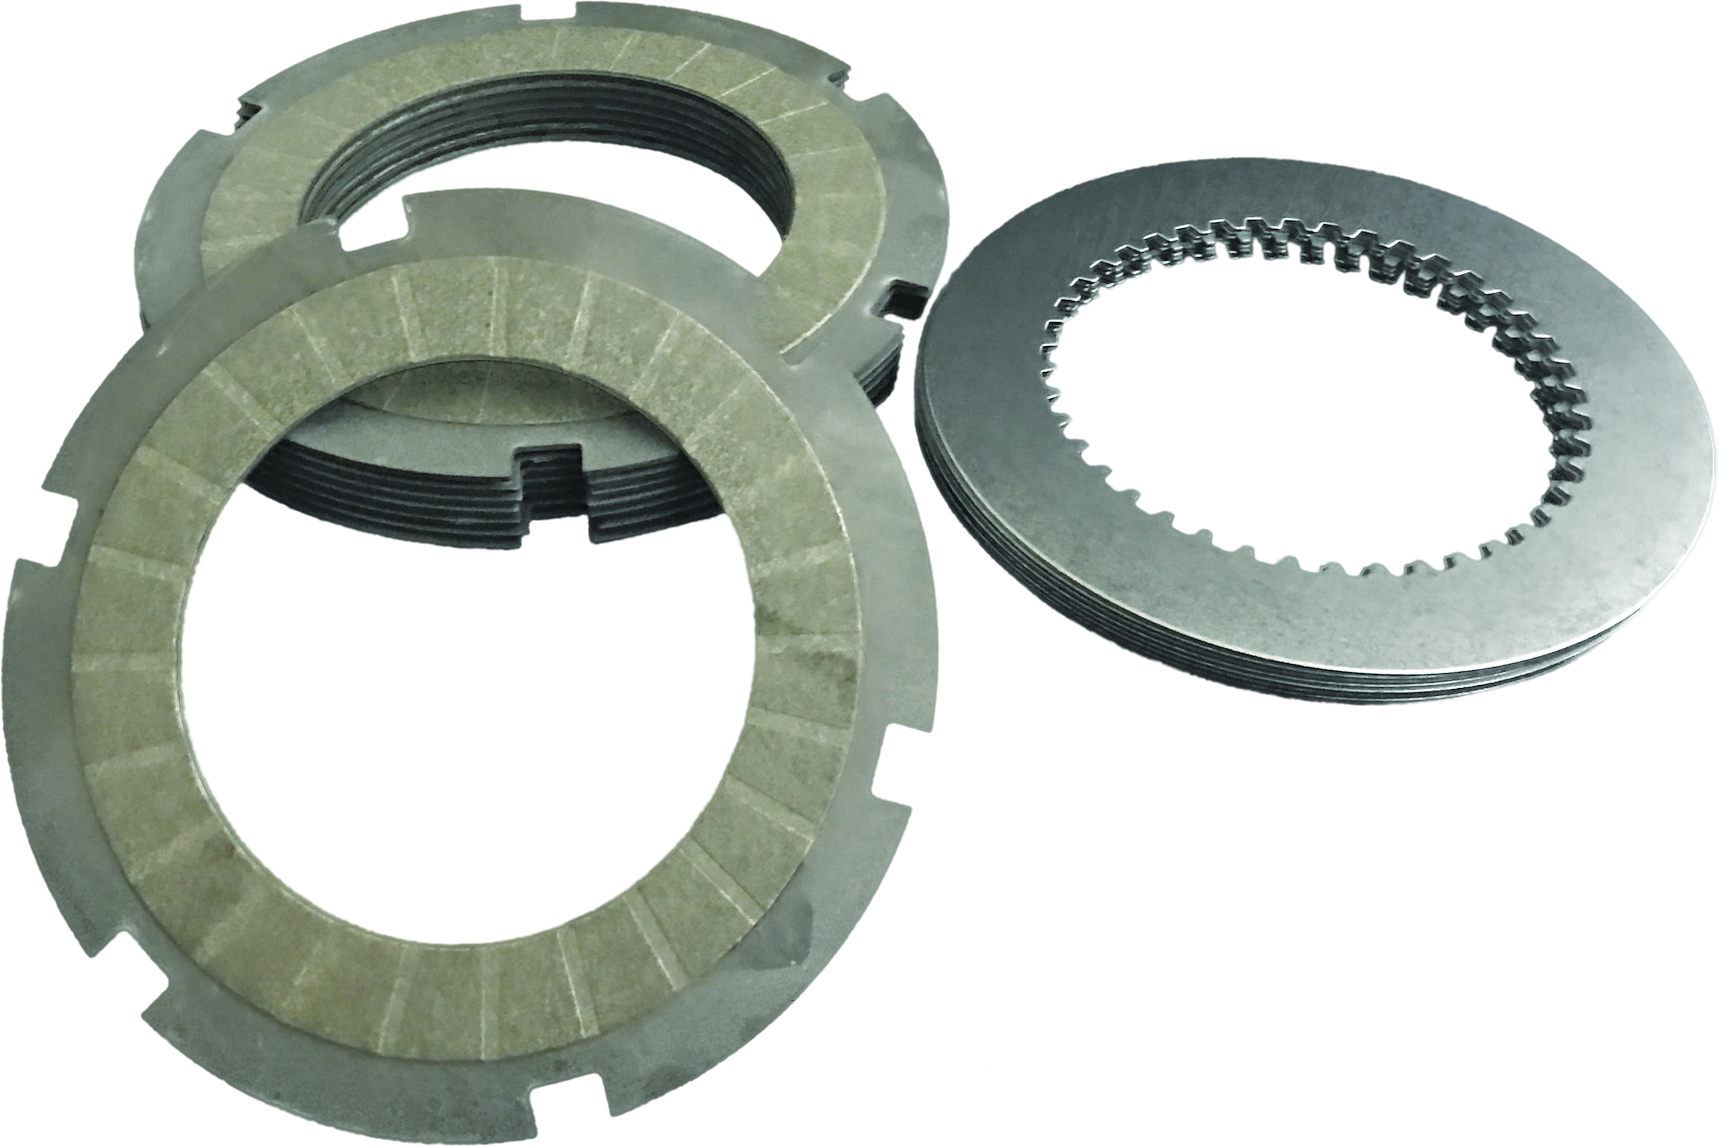 Replacement Clutch Plate Kit For Pro Clutch (#1048-0041) - Click Image to Close